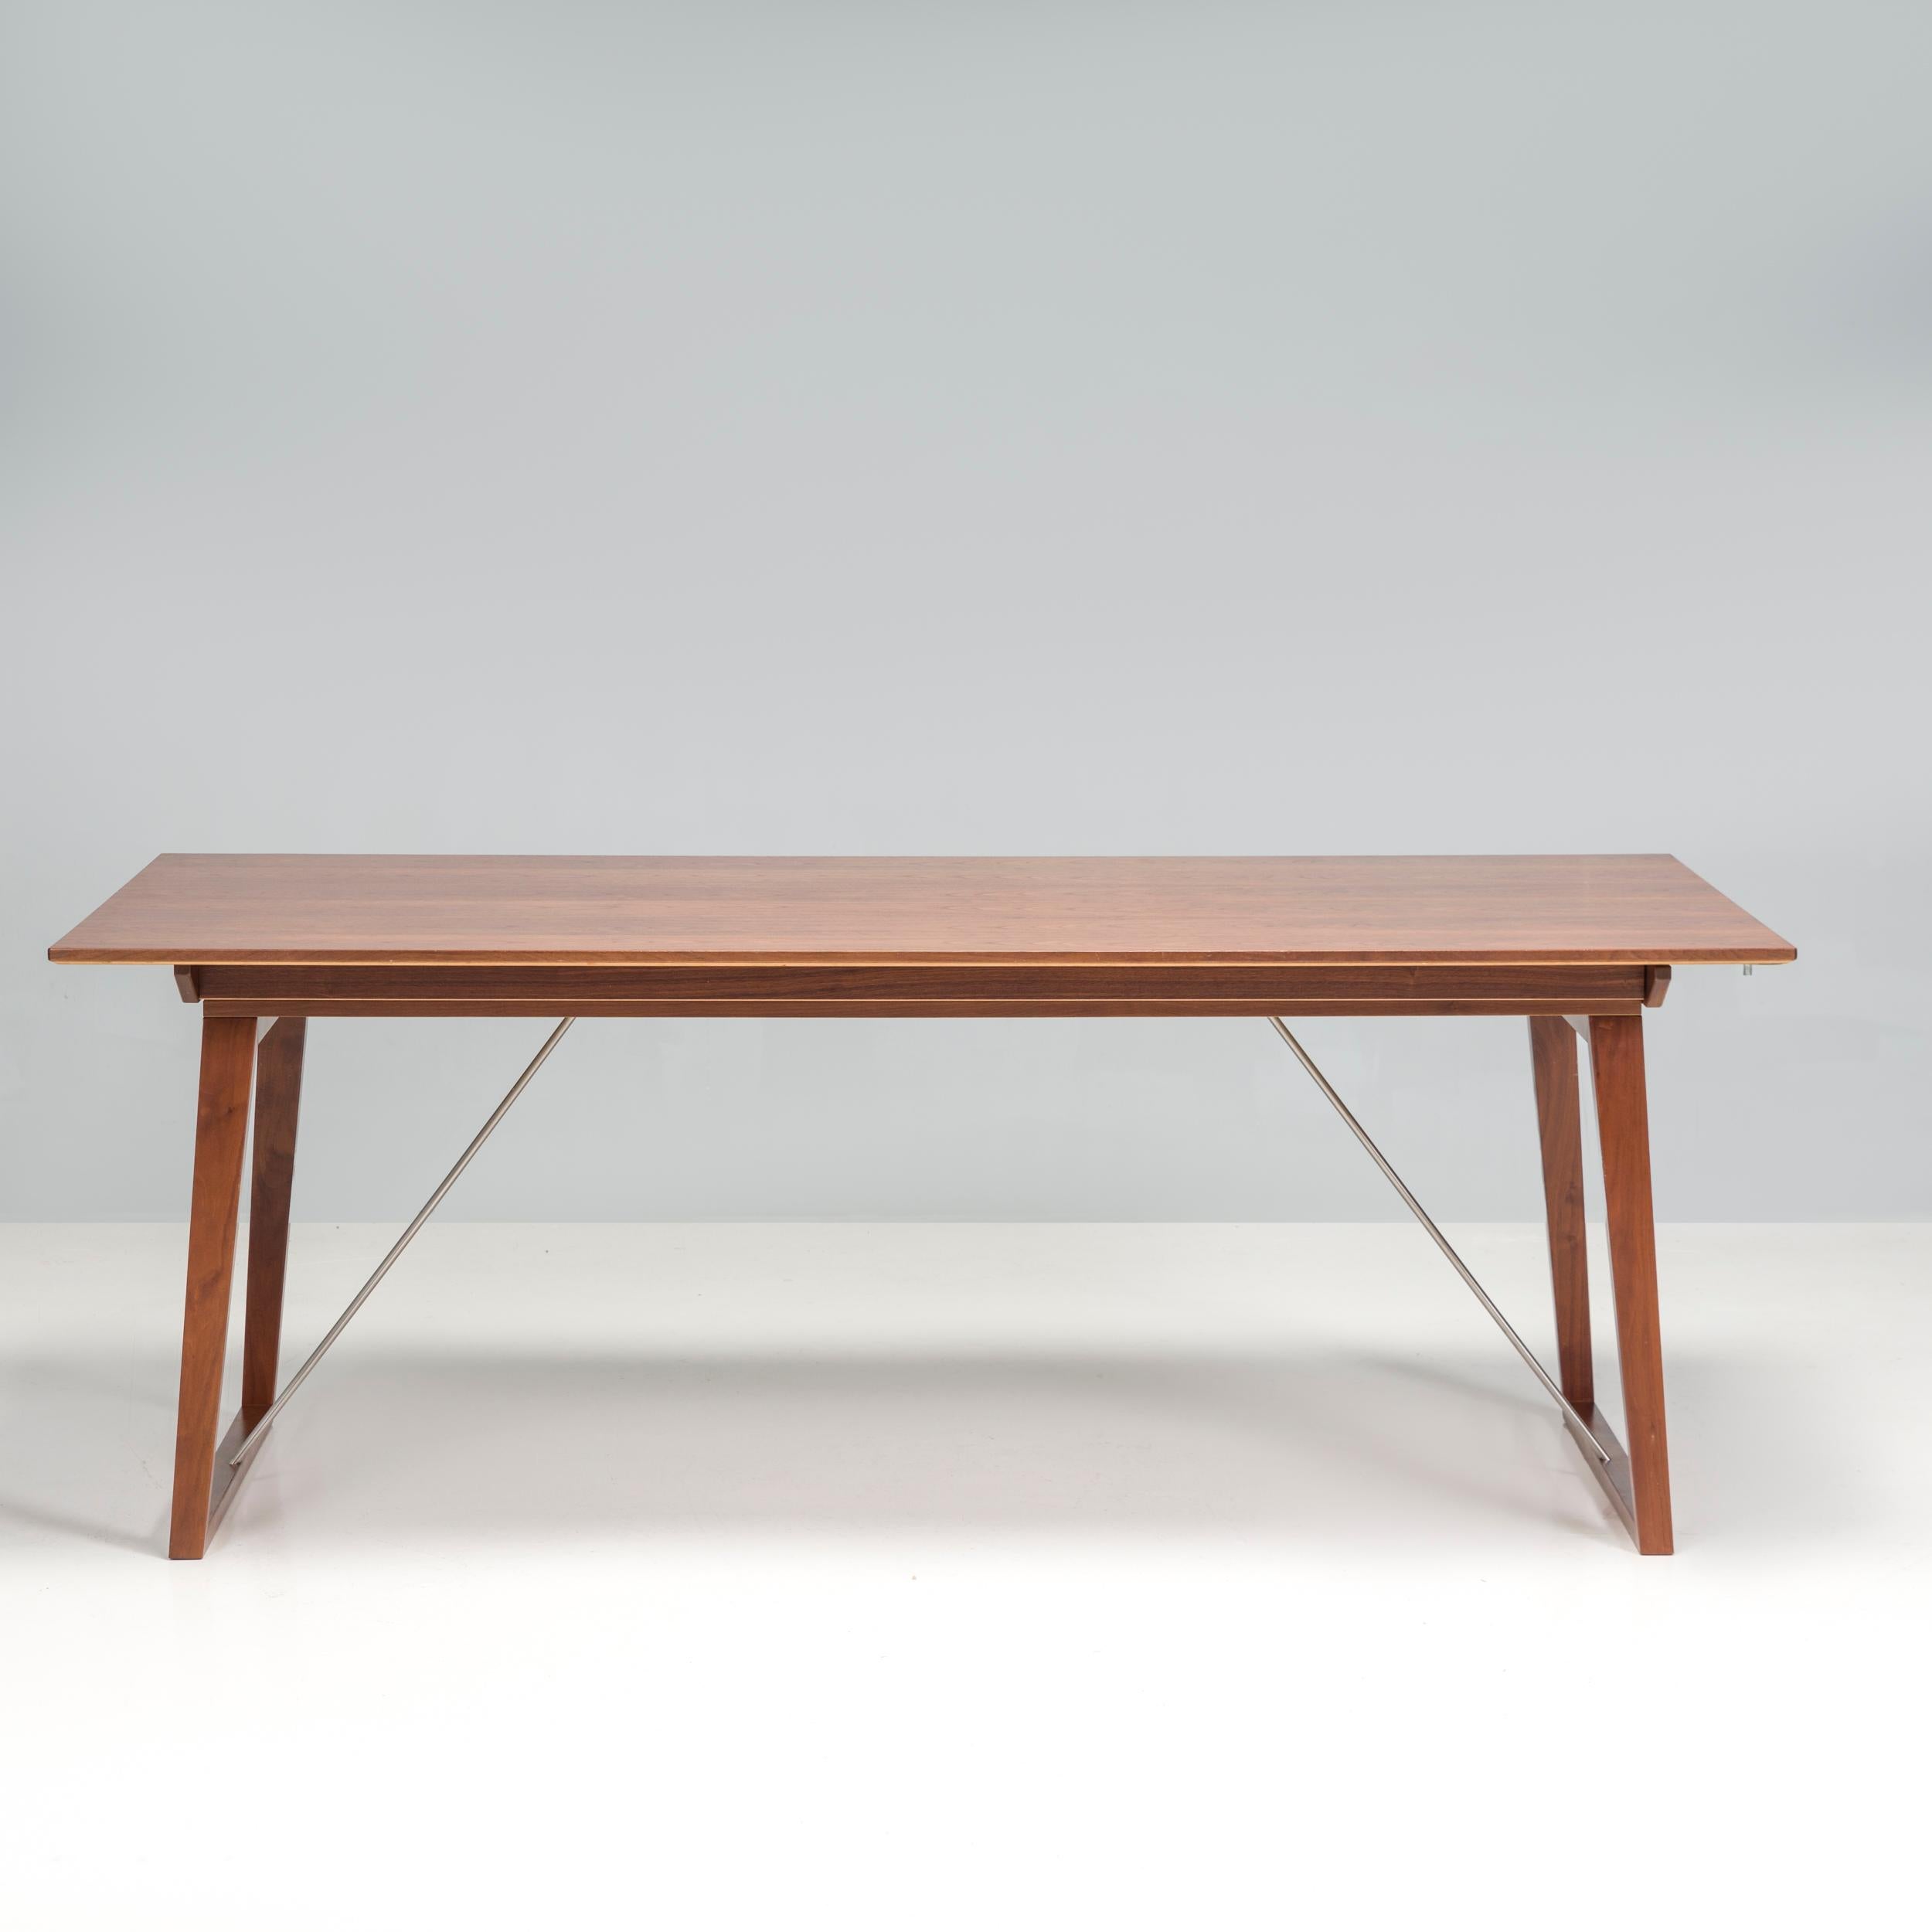 Designed and manufactured by Skovby, this model 38 dining table is a fantastic example of contemporary Scandinavian design.

Constructed from wood, the table features angled trapezoid legs with a large rectangular table top that can seat 8.

The